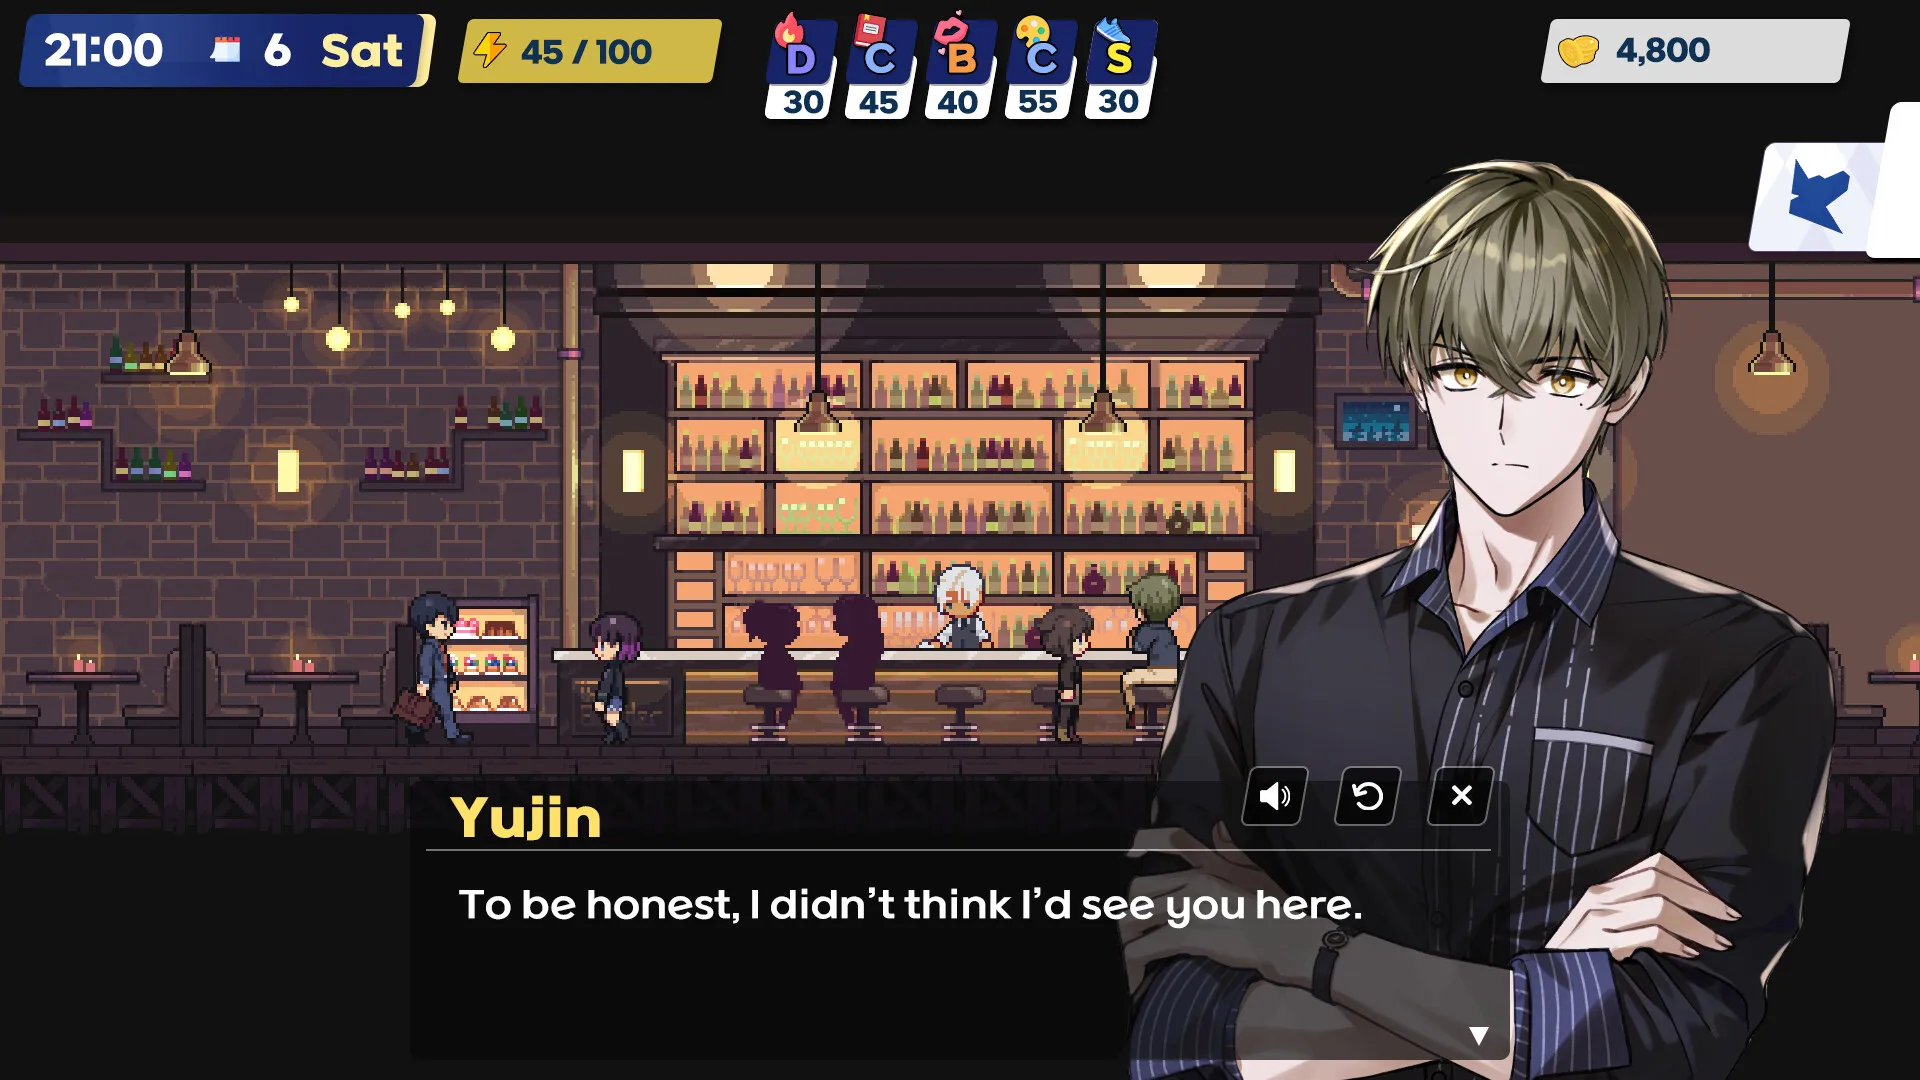 Salty Hounds Otome RPG Enters Early Access on PCs This Week